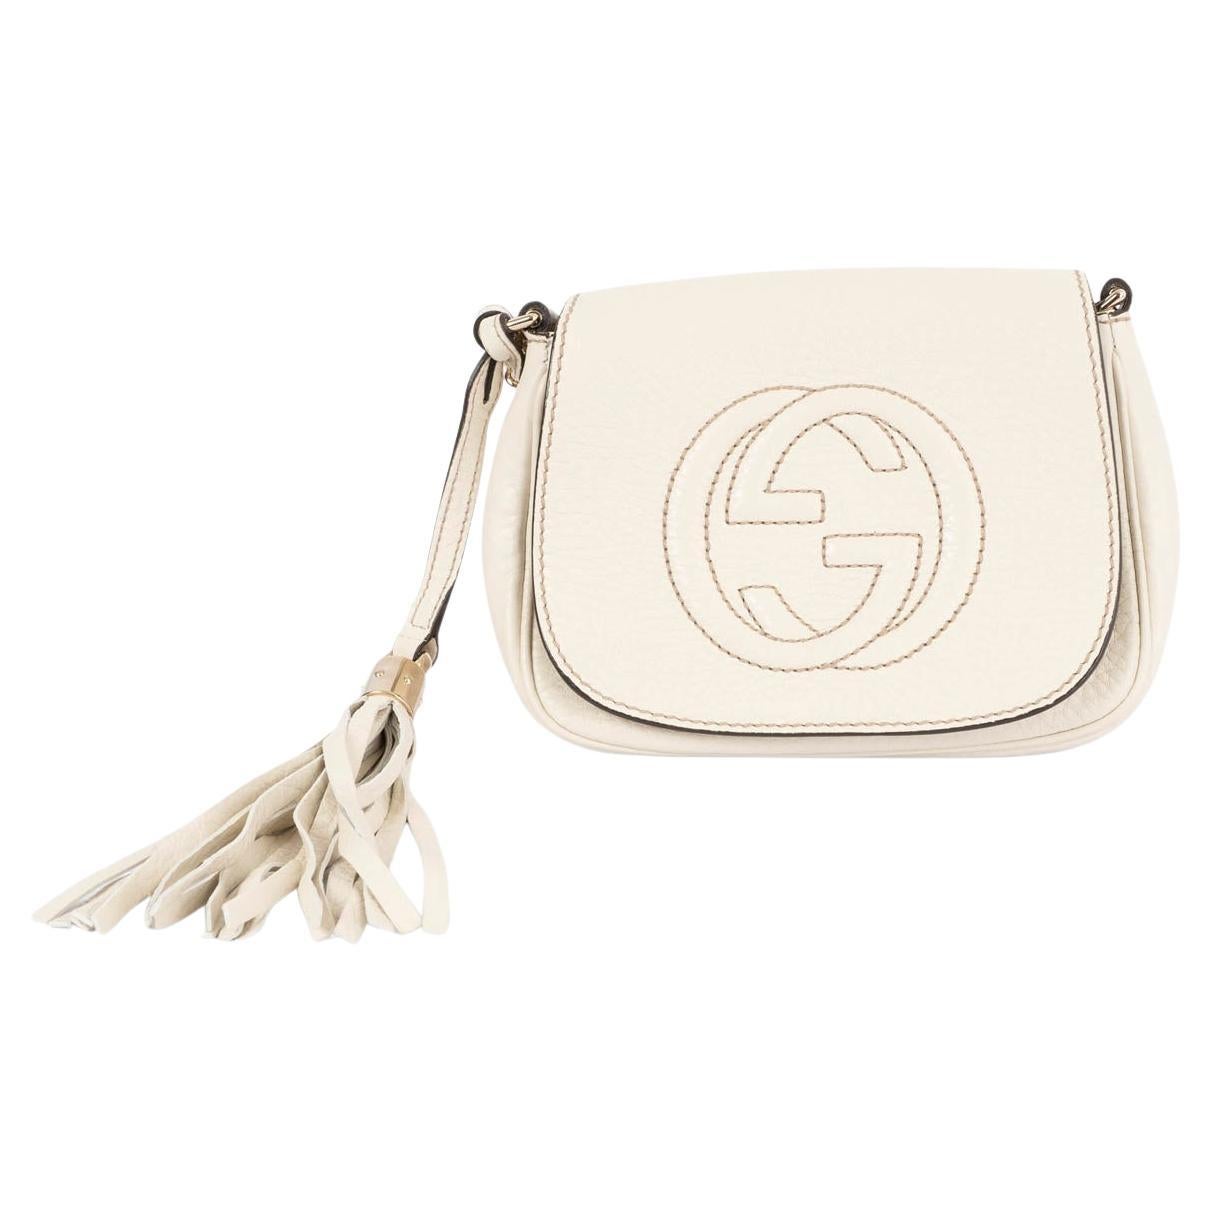 GUCCI ivory leather SMALL SOHO FLAP Shoulder Bag For Sale